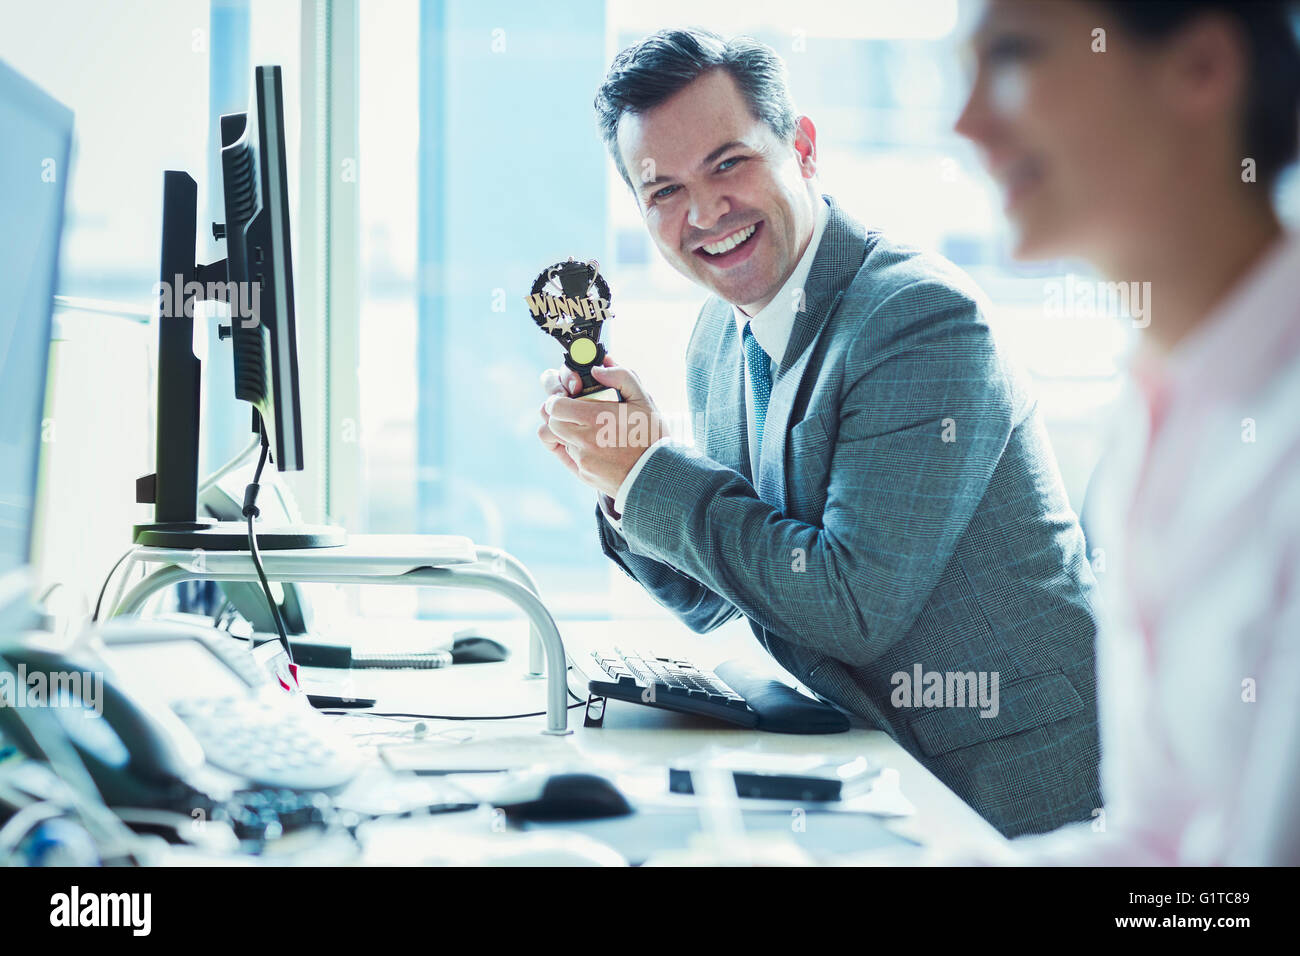 Portrait of enthusiastic woman holding trophy winner at desk in office Banque D'Images